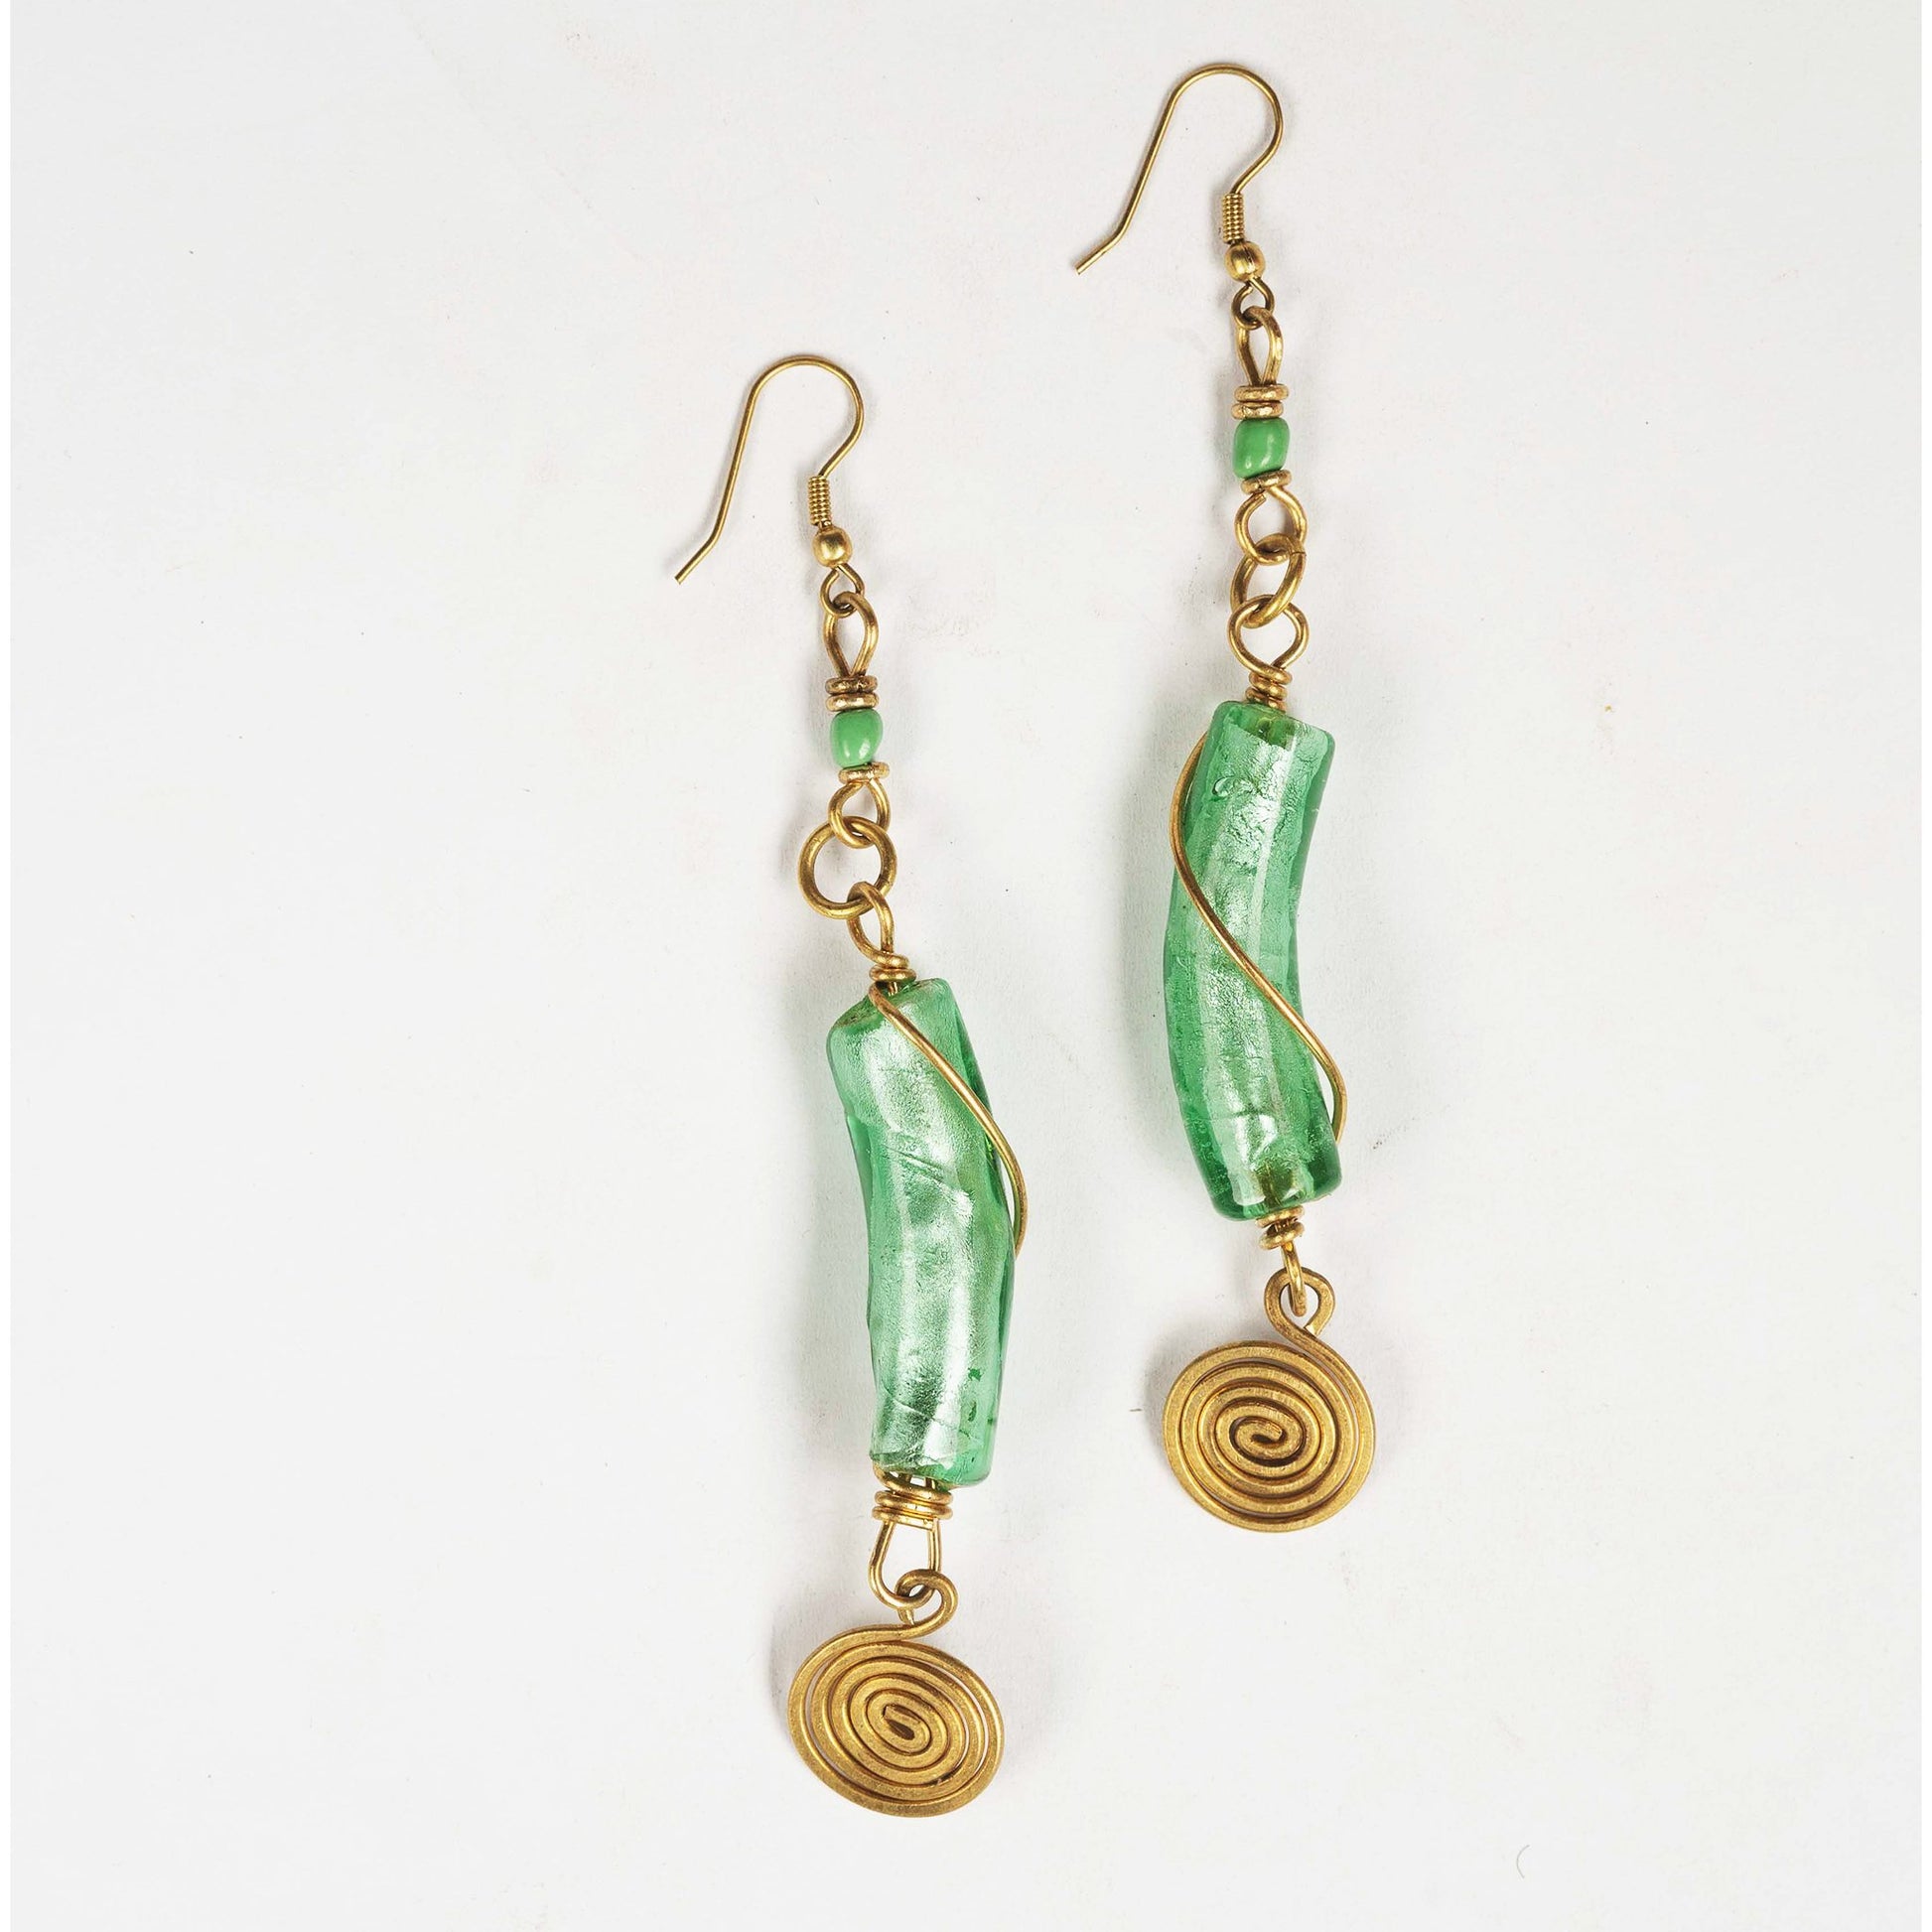 African Earrings - Authentic African handicrafts | Clothing, bags, painting, toys & more - CULTURE HUB by Muthoni Unchained